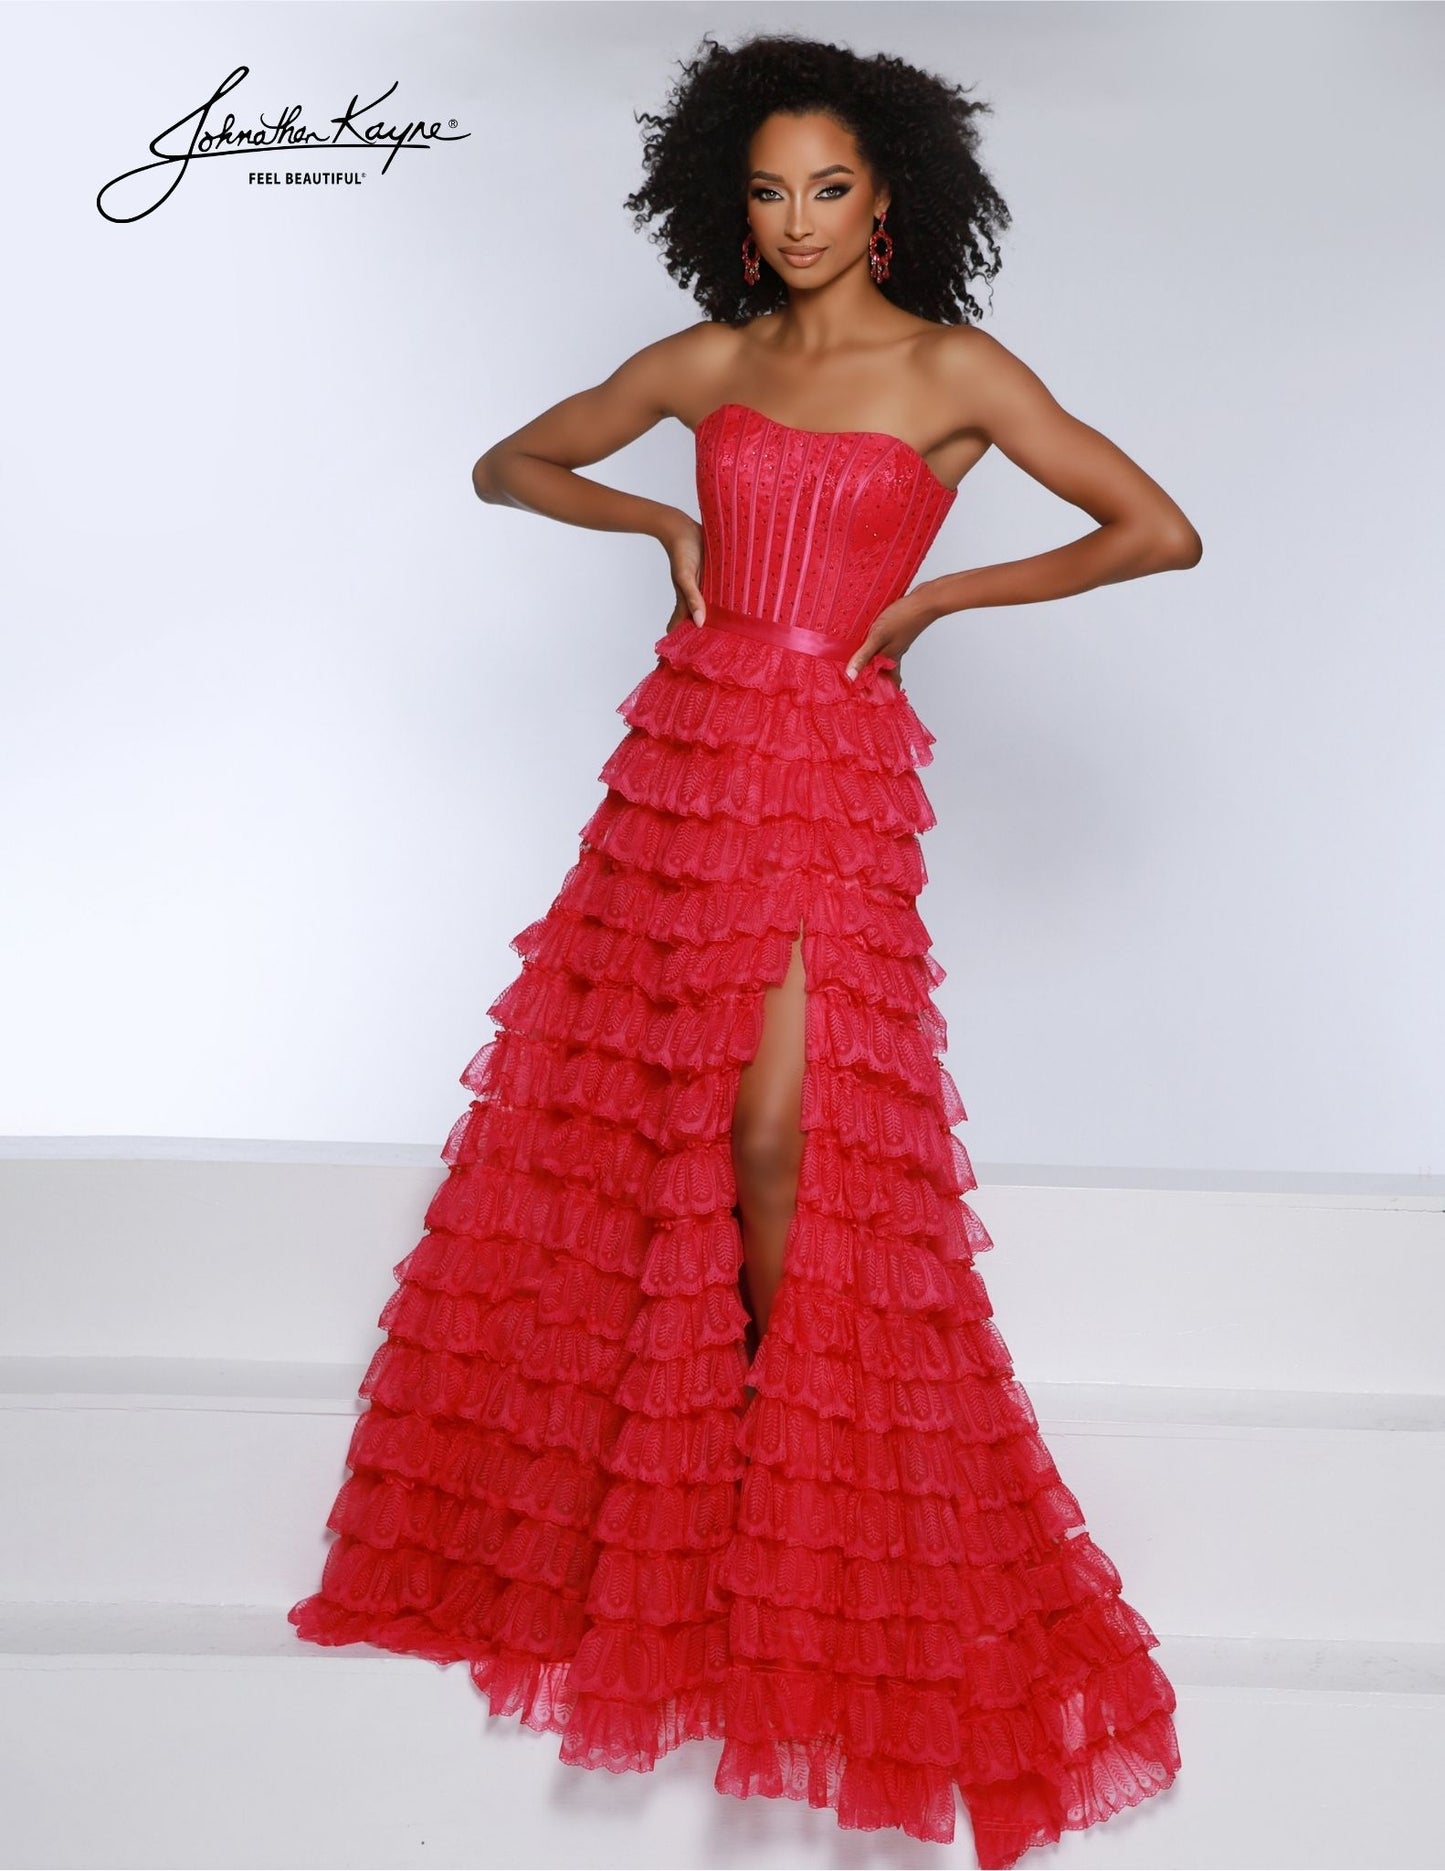 This Johnathan Kayne 2861 Long Prom Dress elegantly combines luxurious details like corset lace and ruffles with a strapless A-line silhouette. Perfectly crafted for formal occasions and pageants, it's the ideal gown for a sophisticated evening. Prepare to captivate in our strapless lace A-line gown. The cascading ruffles create an air of enchantment, while the exposed boning adds a touch of charm. The daring slit and corset back completes the look.